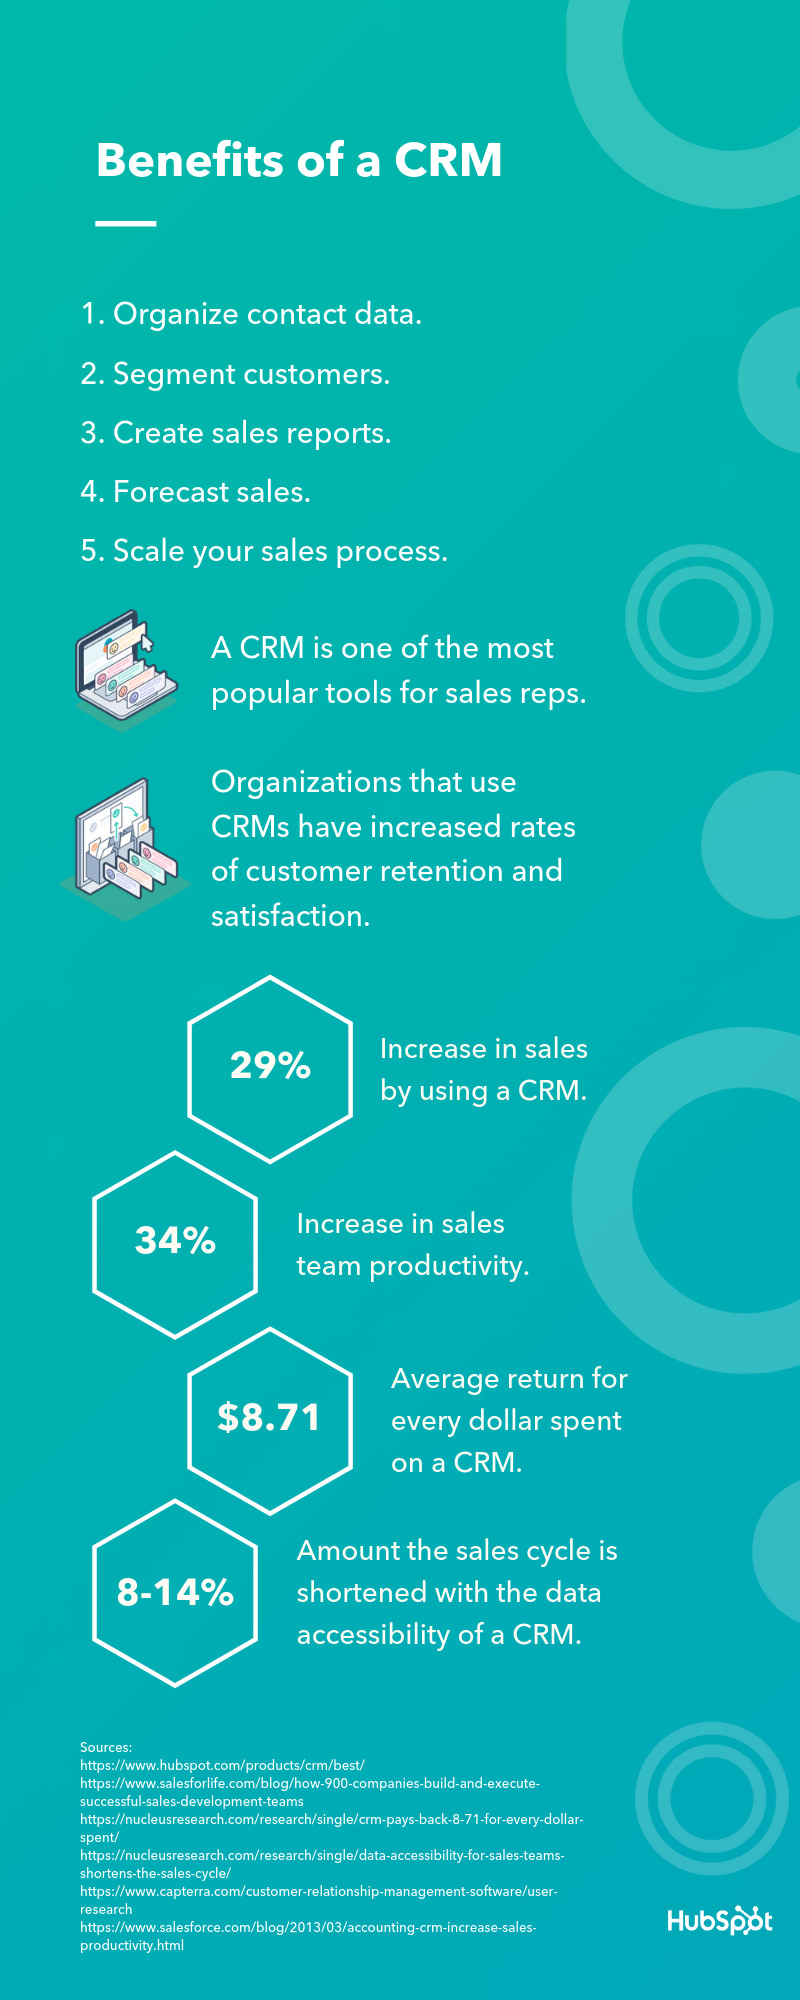 Benefits of a CRM Infographic from HubSpot